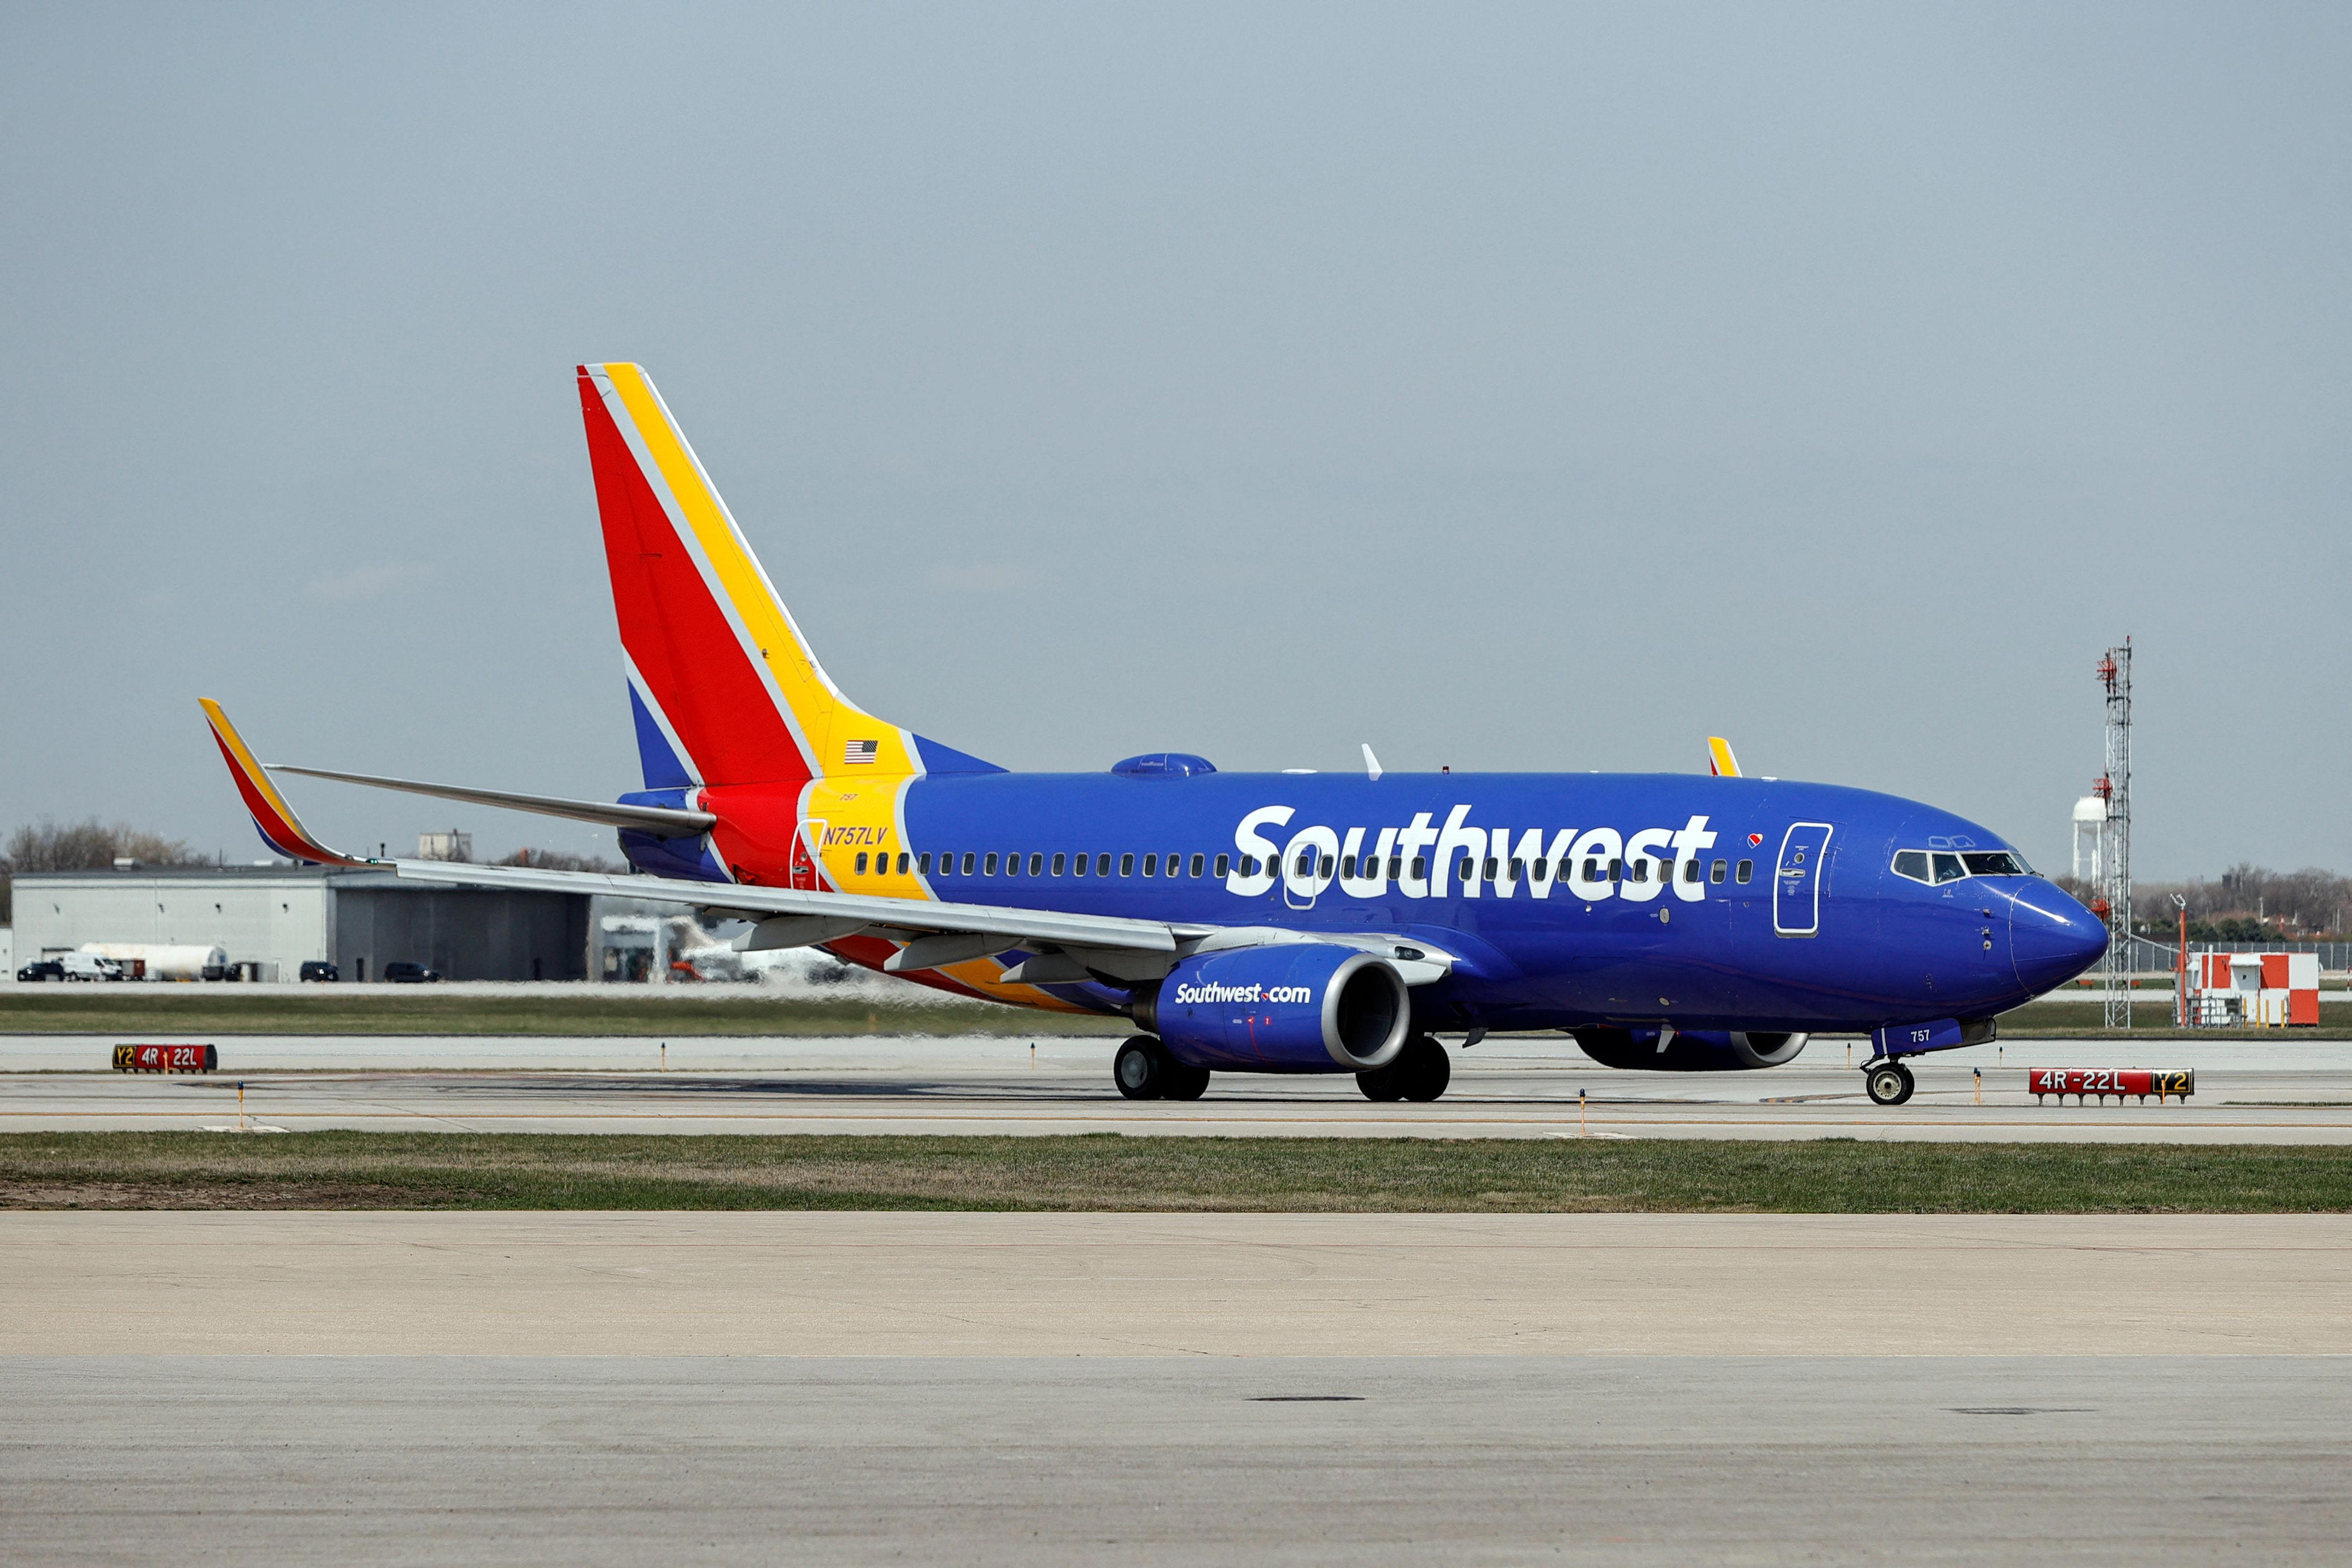 southwest to exit 4 airports and limit hiring following profit loss, boeing plane delays